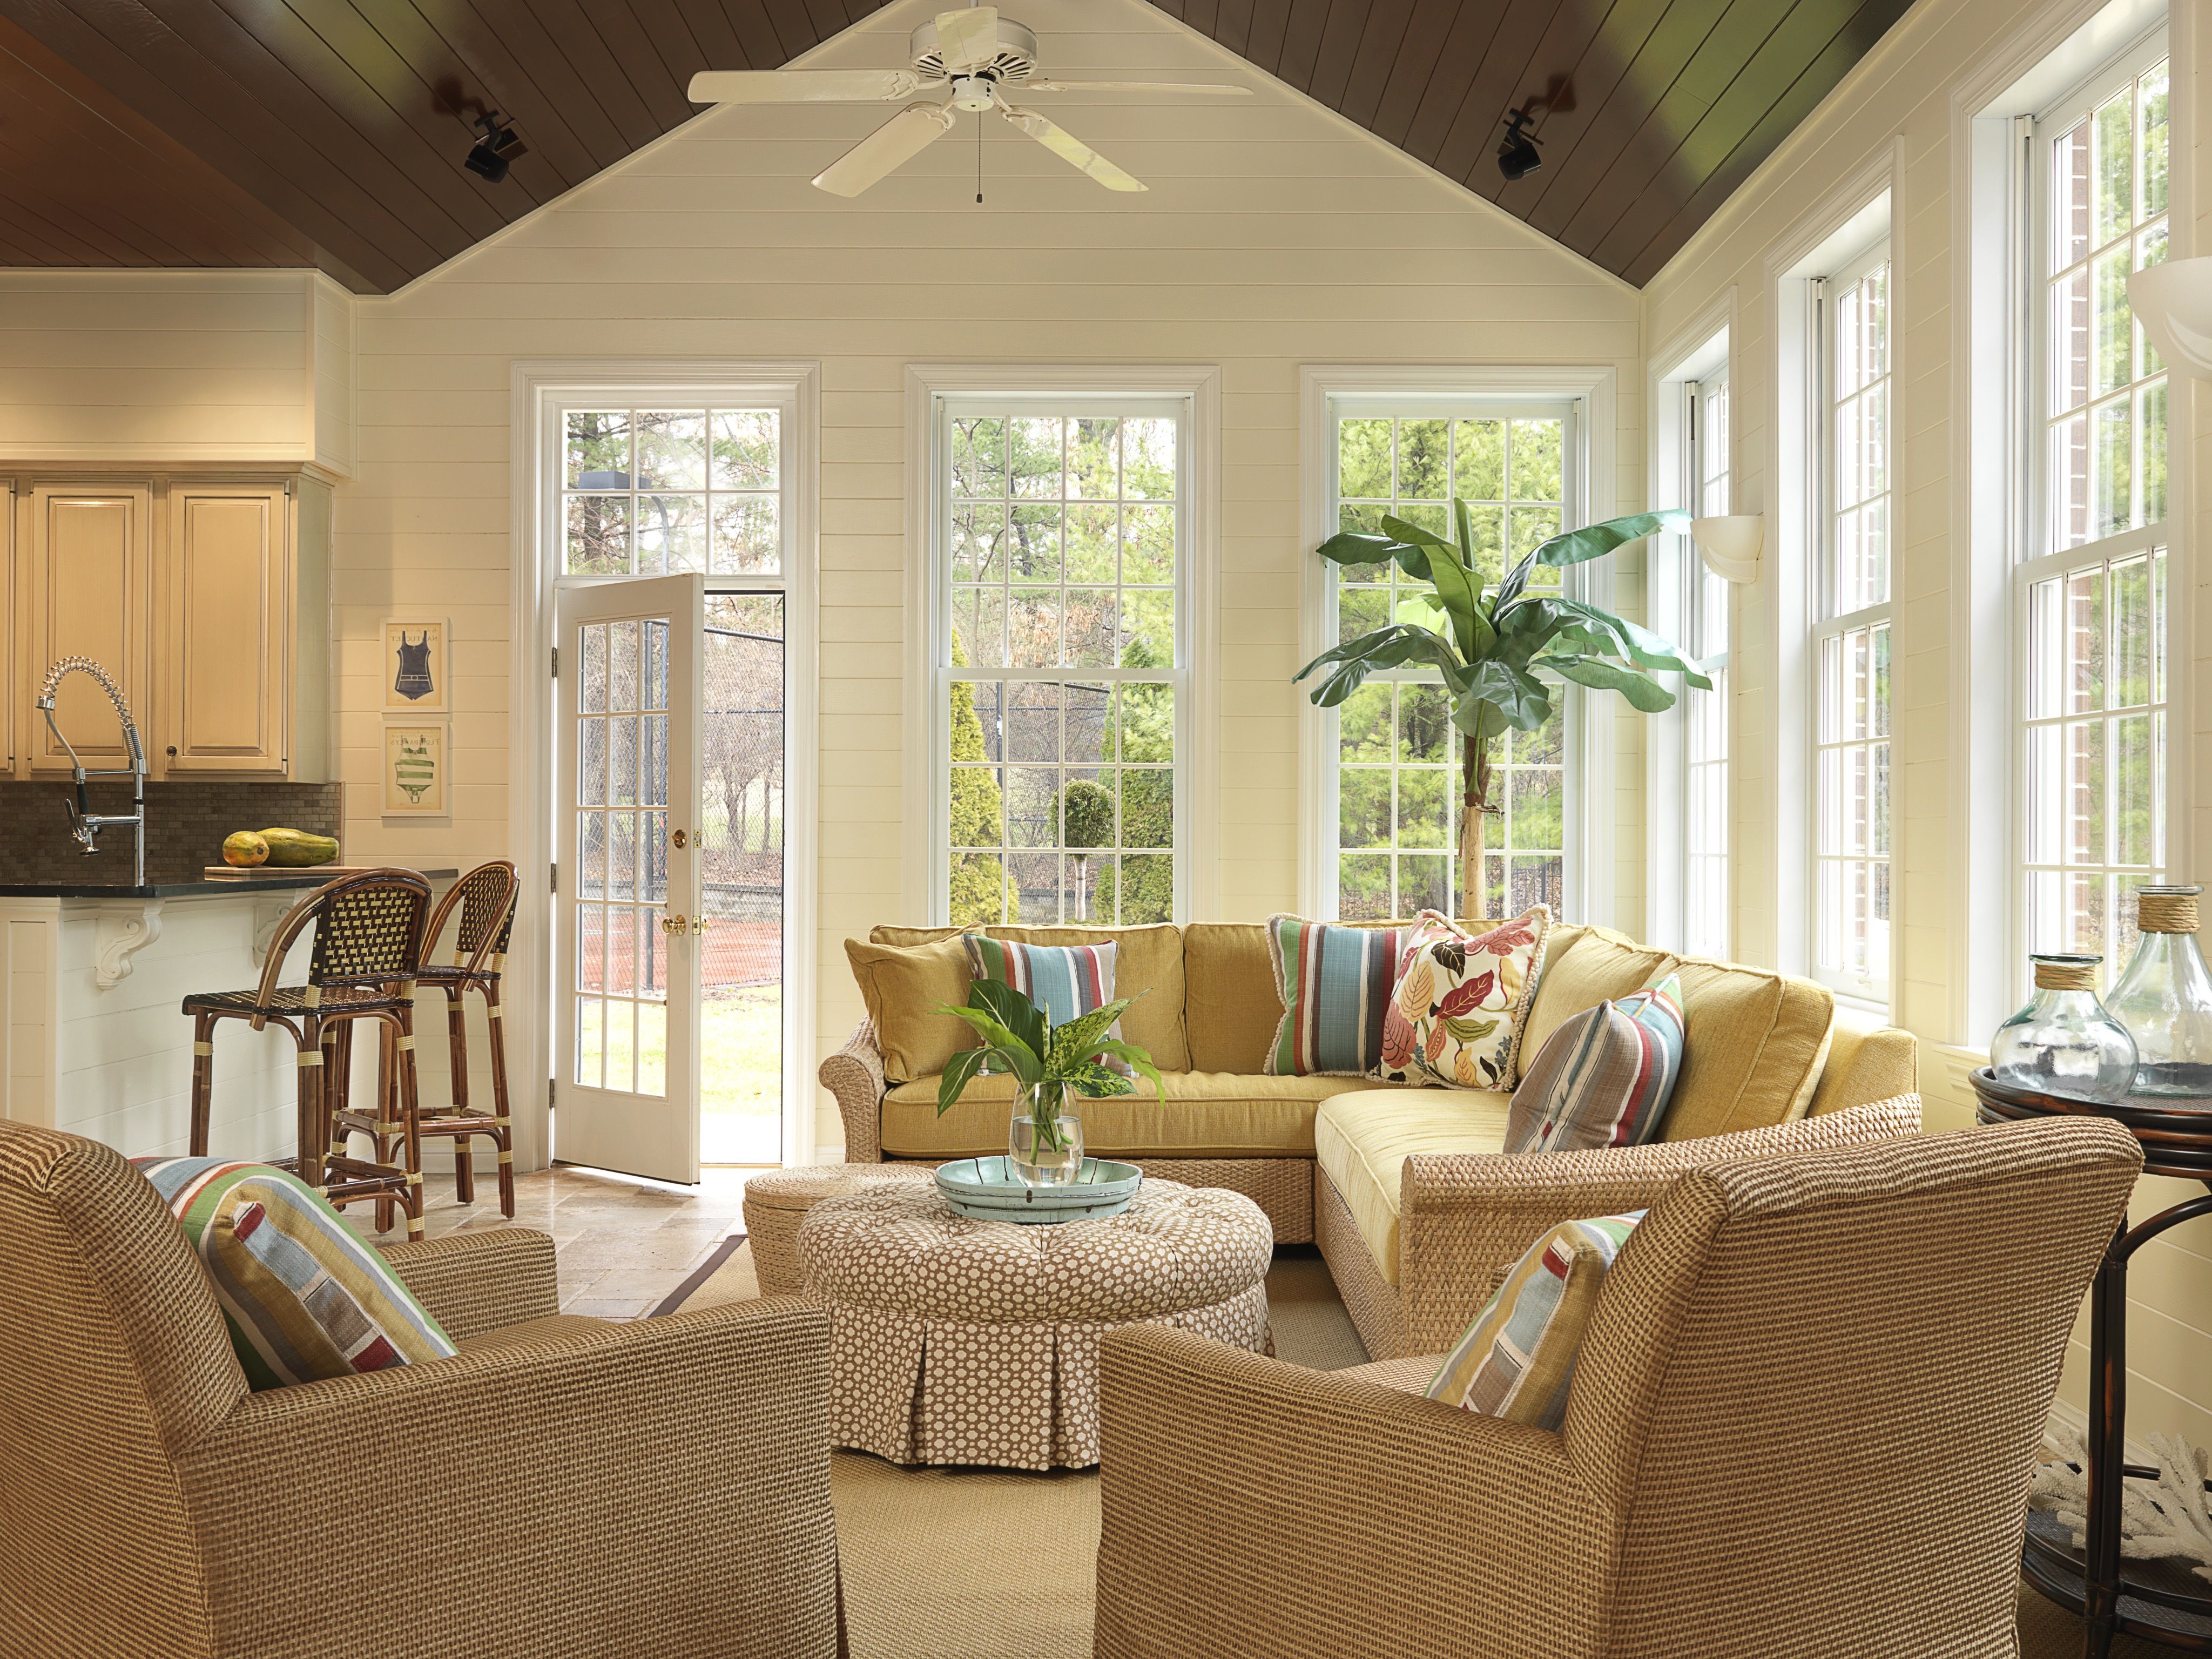 Tropical Poolhouse Living Room With Wicker Furnishings (View 20 of 30)